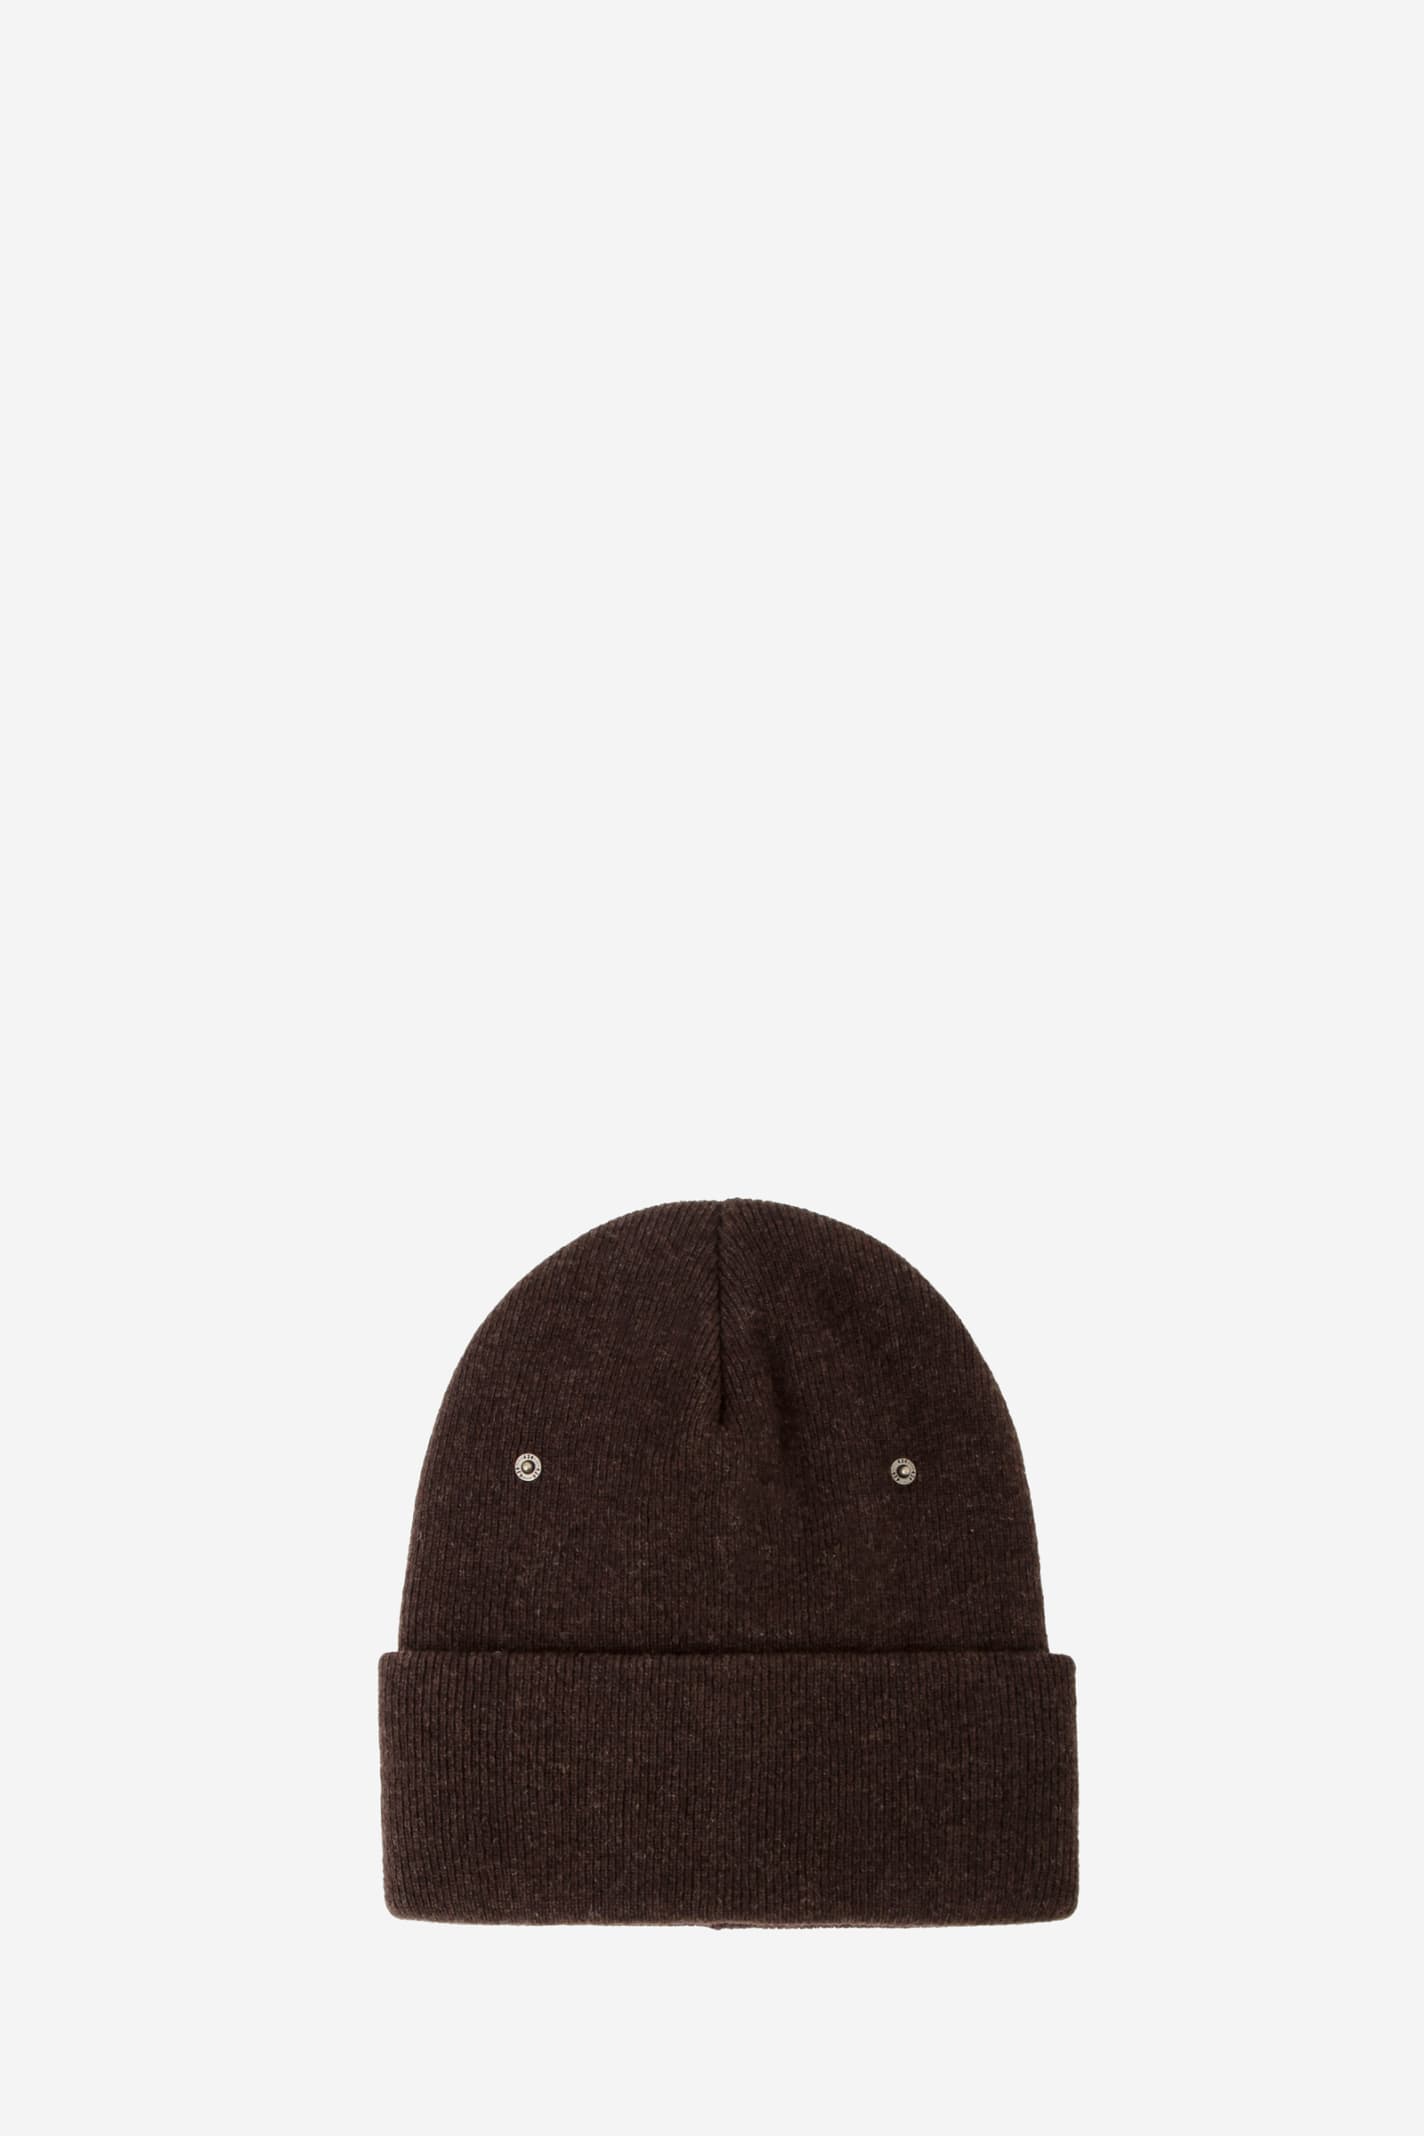 Fourtwofour On Fairfax Hats In Brown